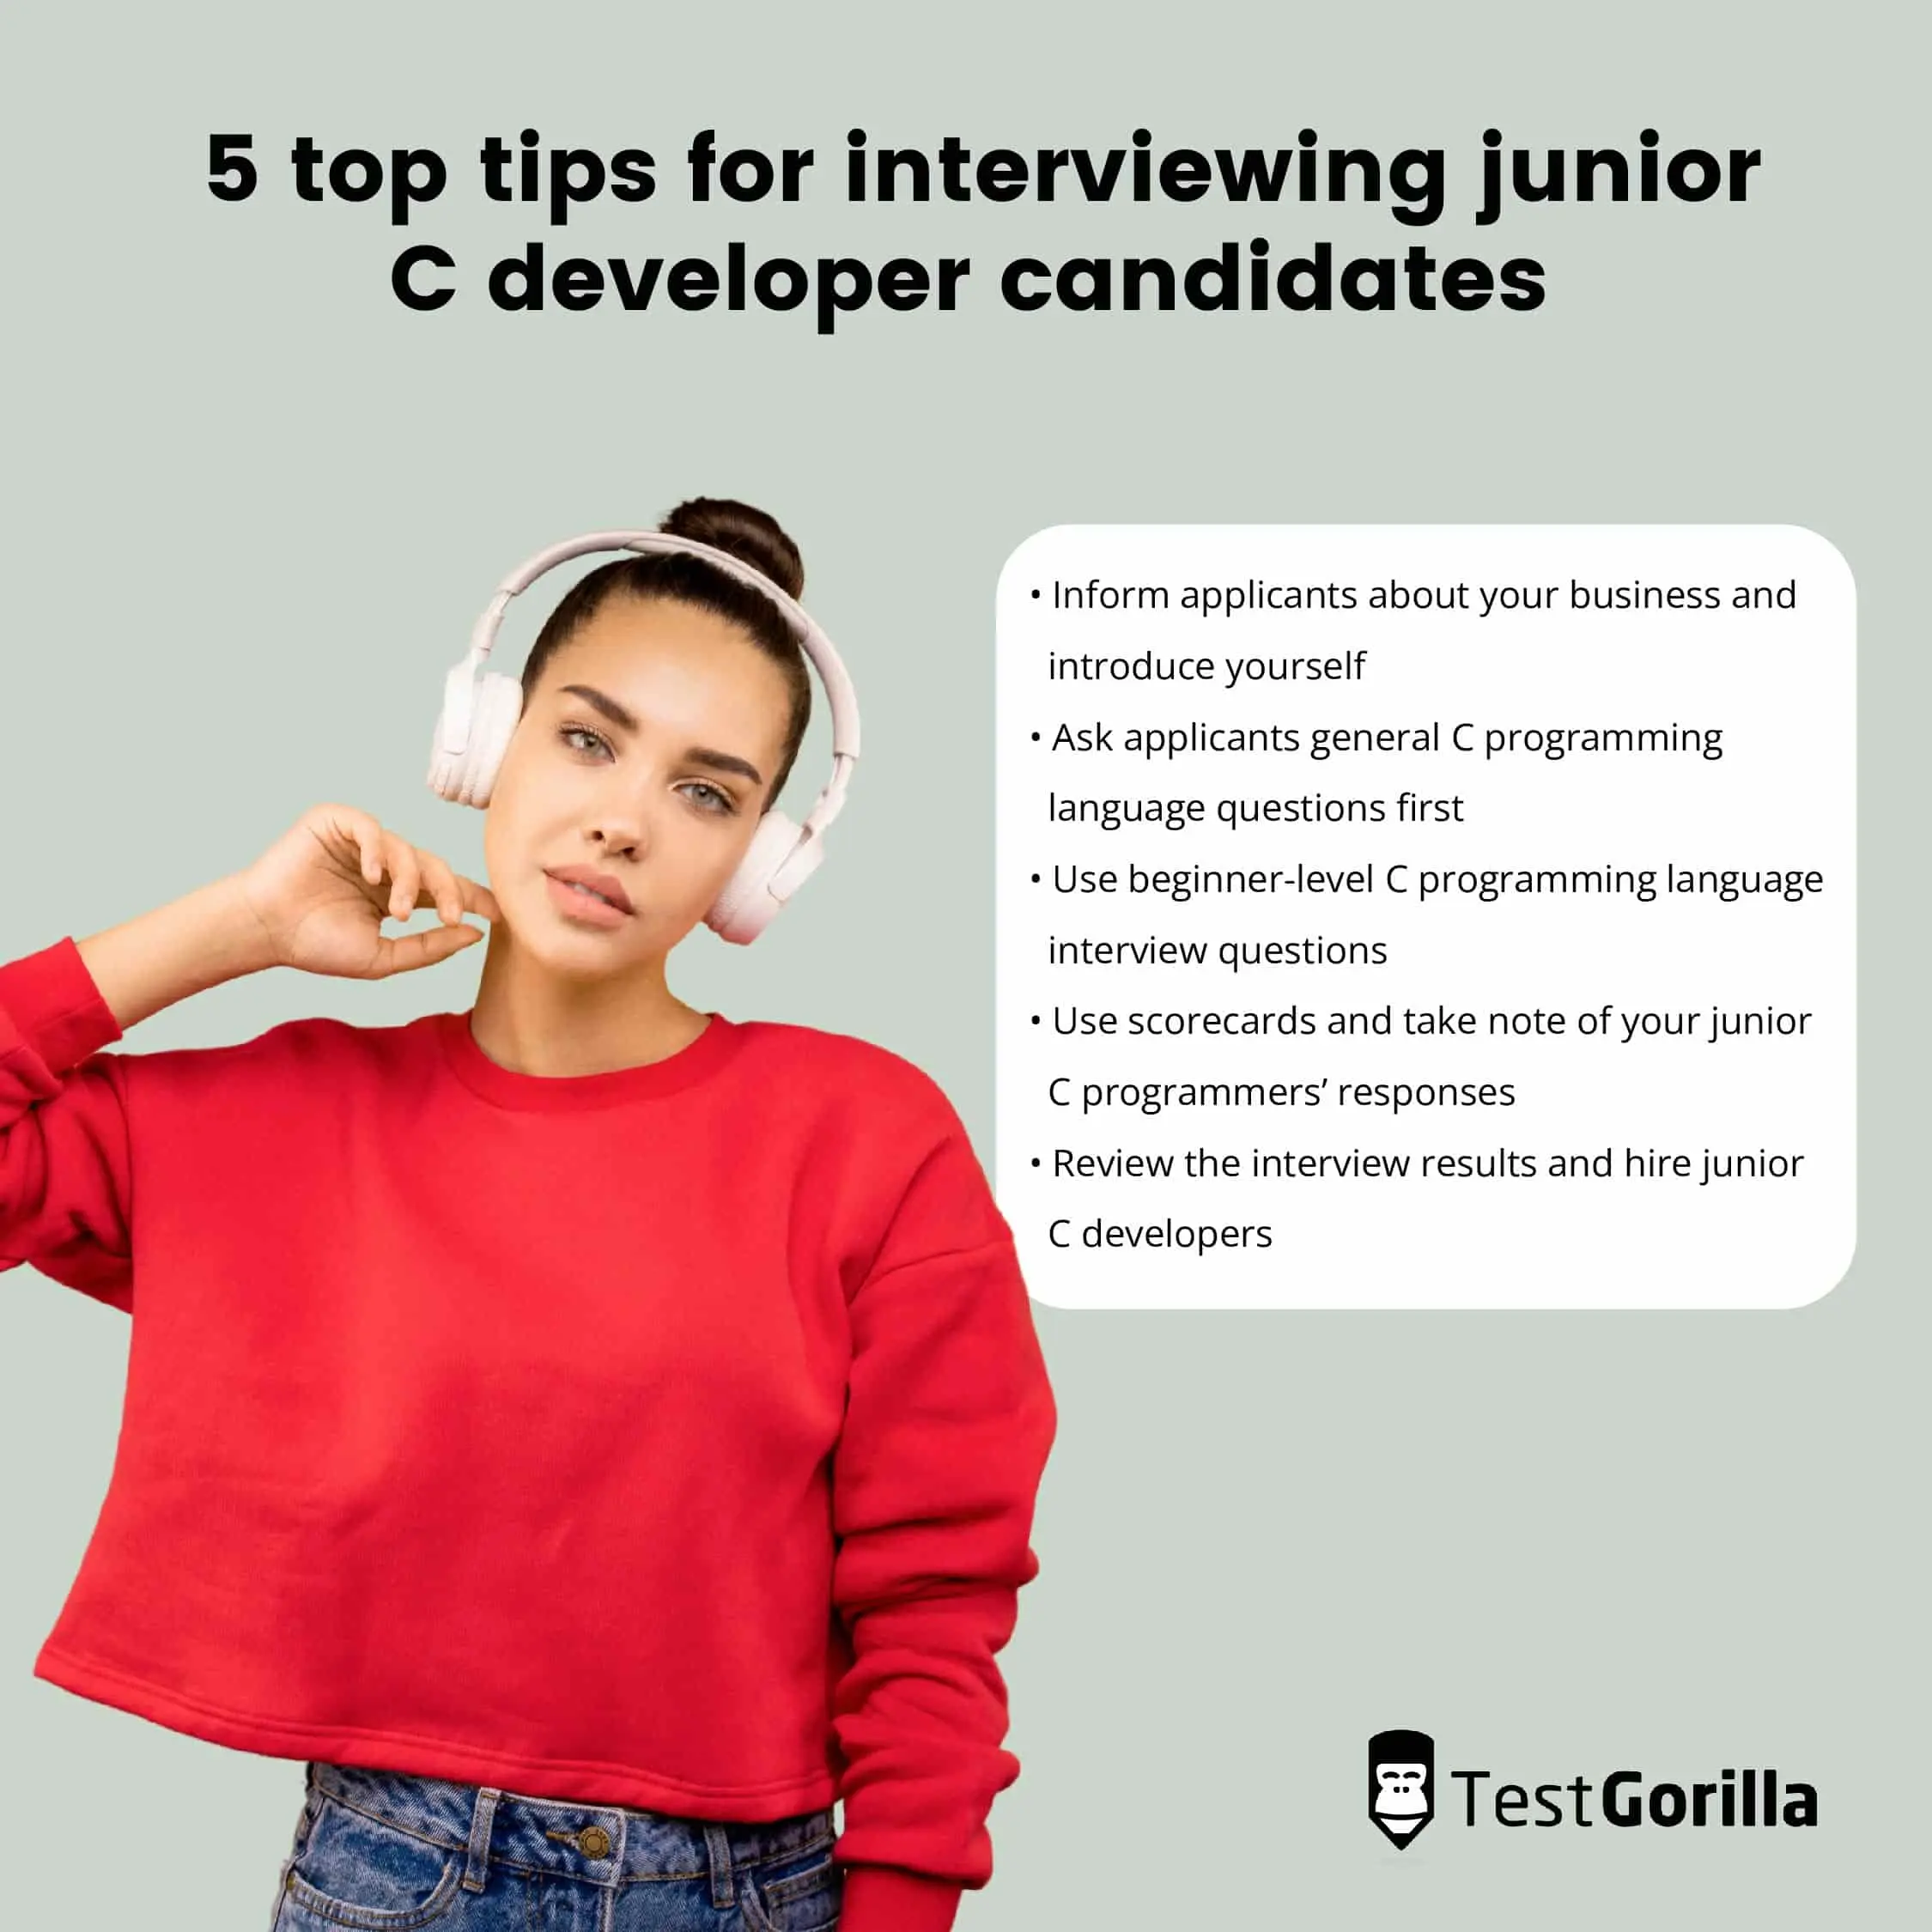 top tips for interviewing junior C developer candidates